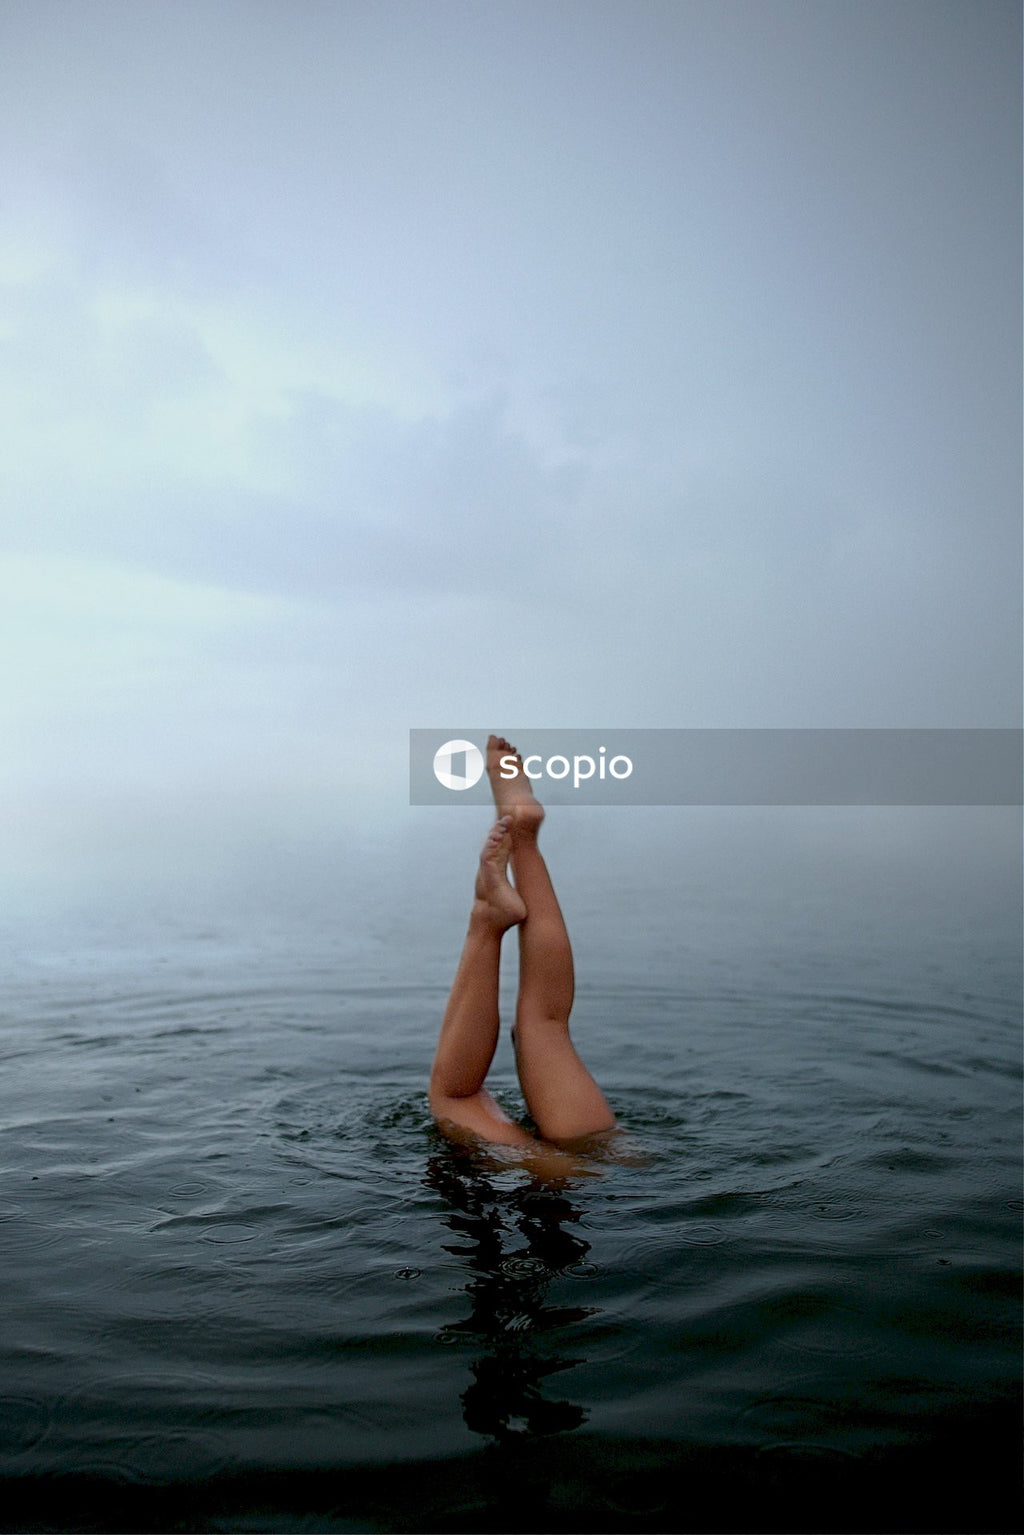 A person's legs above water